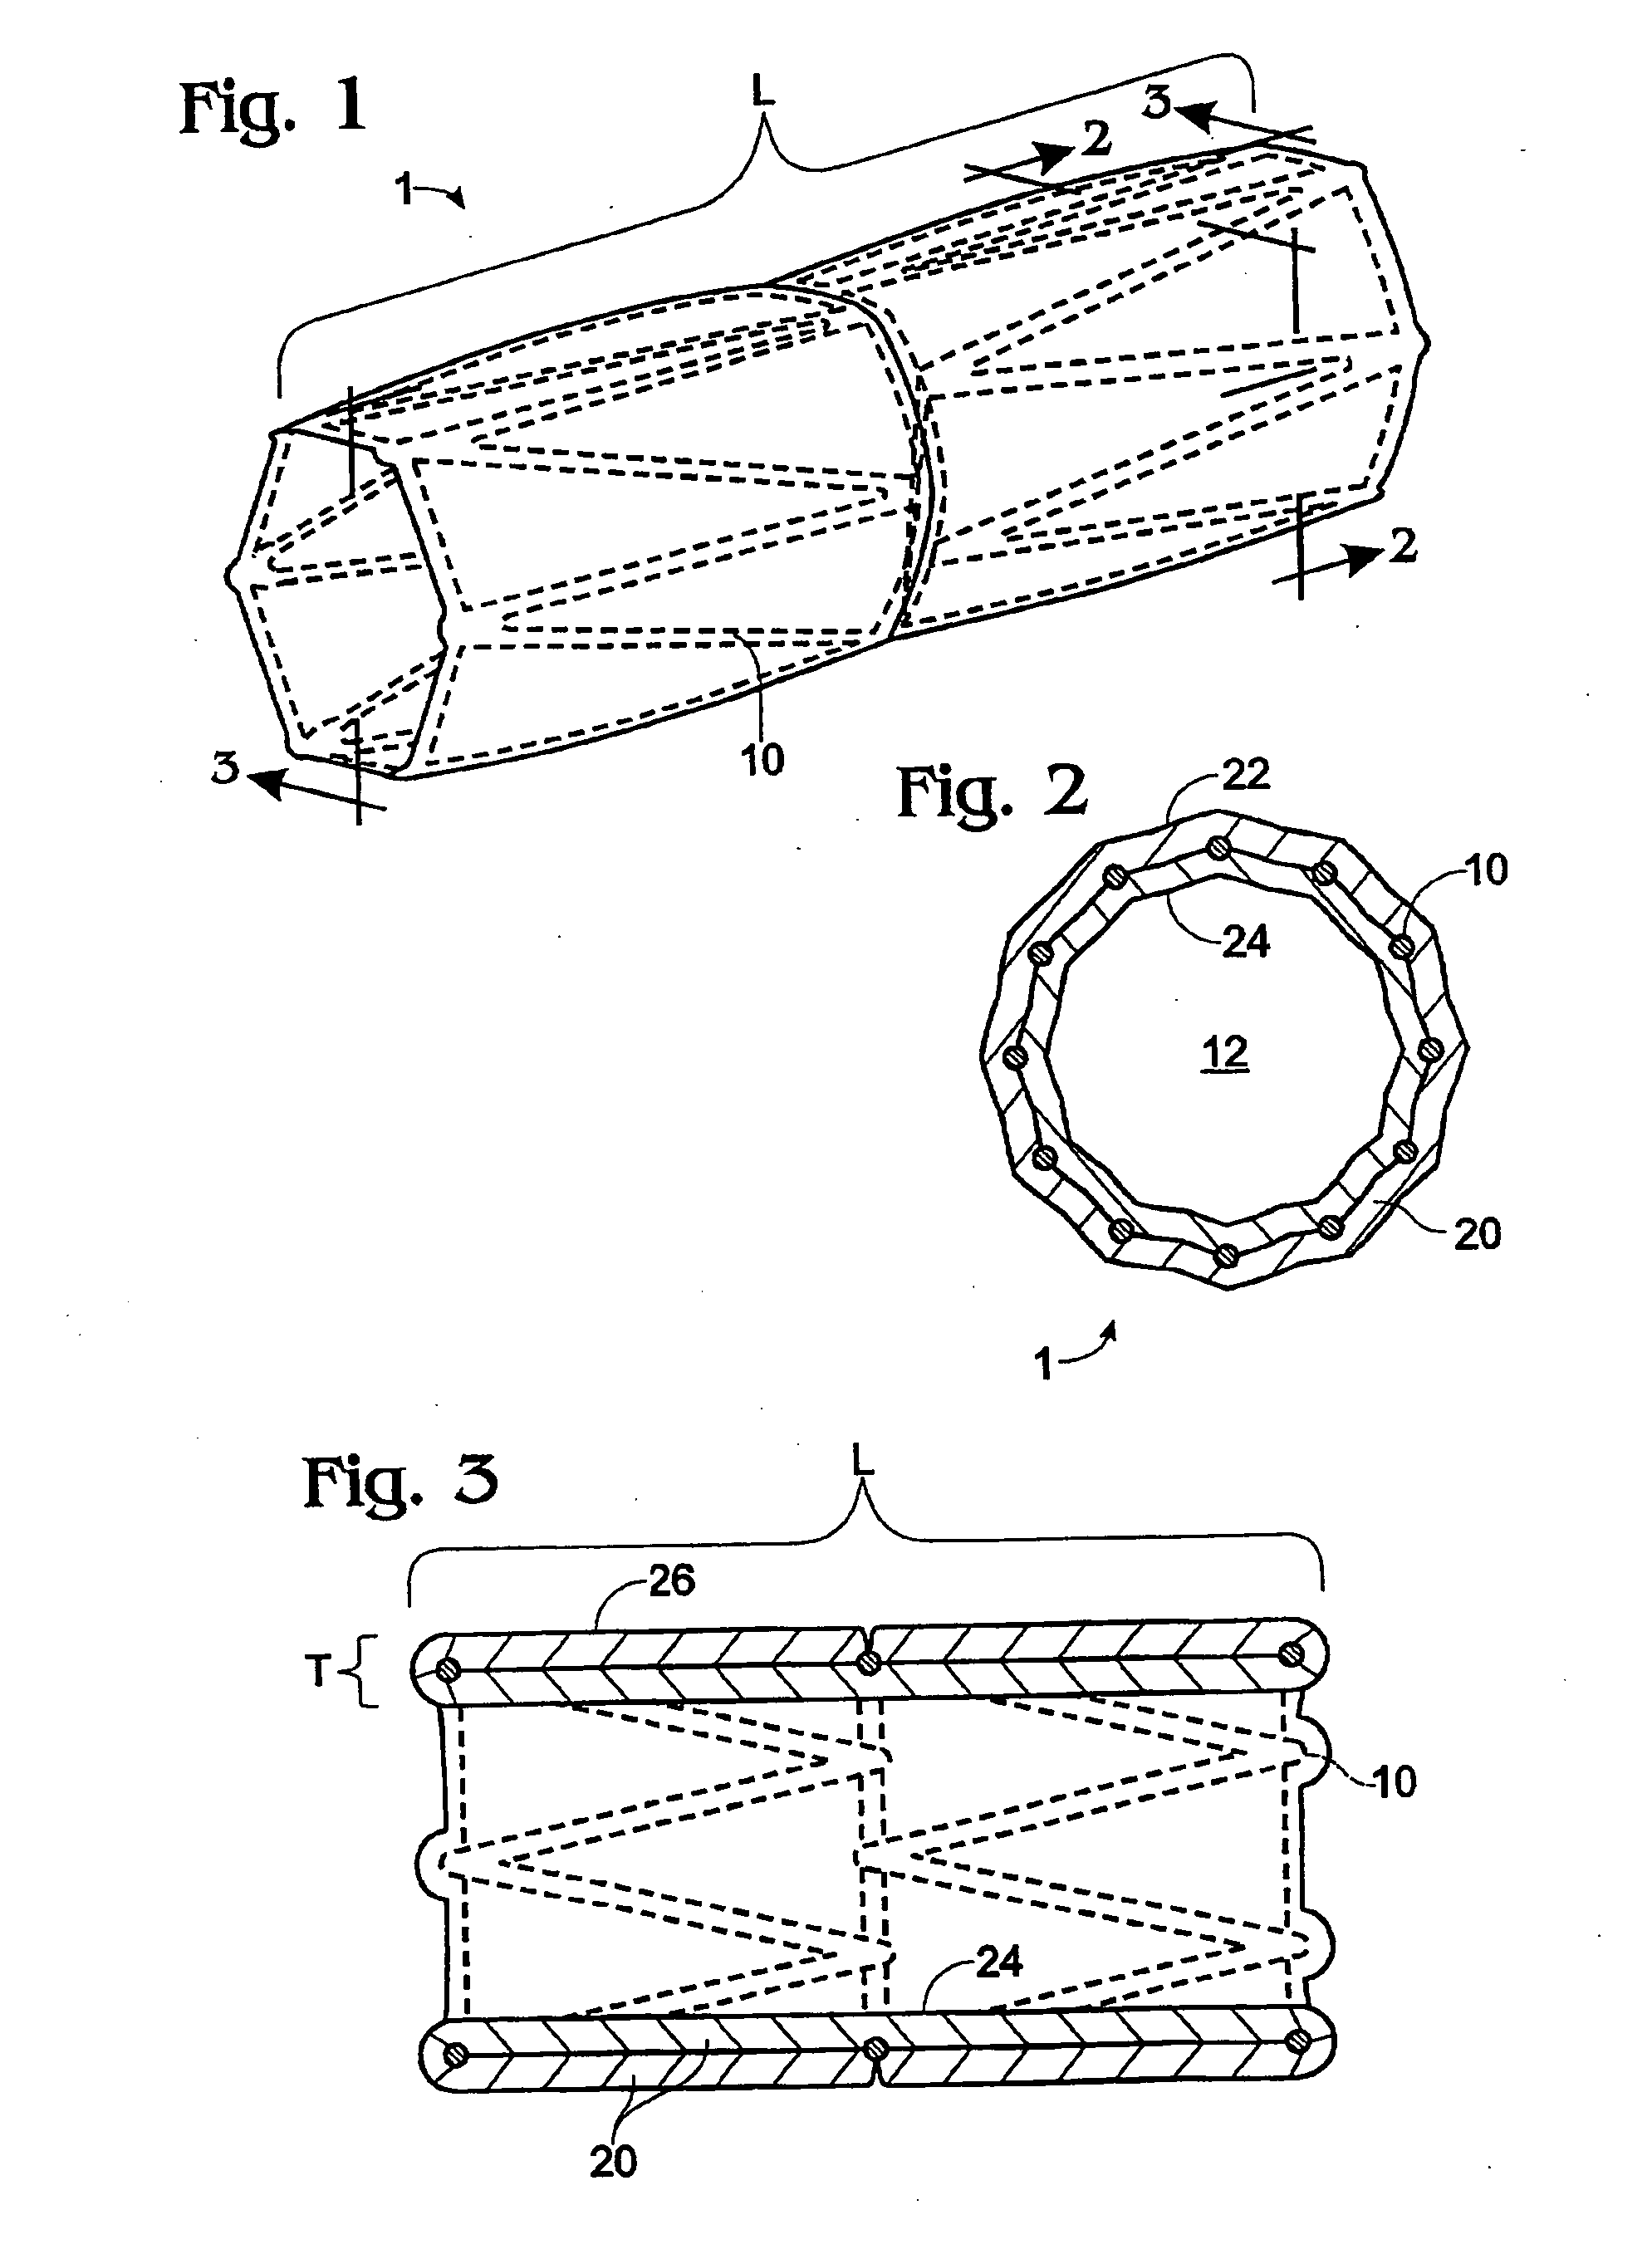 Automated manufacturing device and method for biomaterial fusion